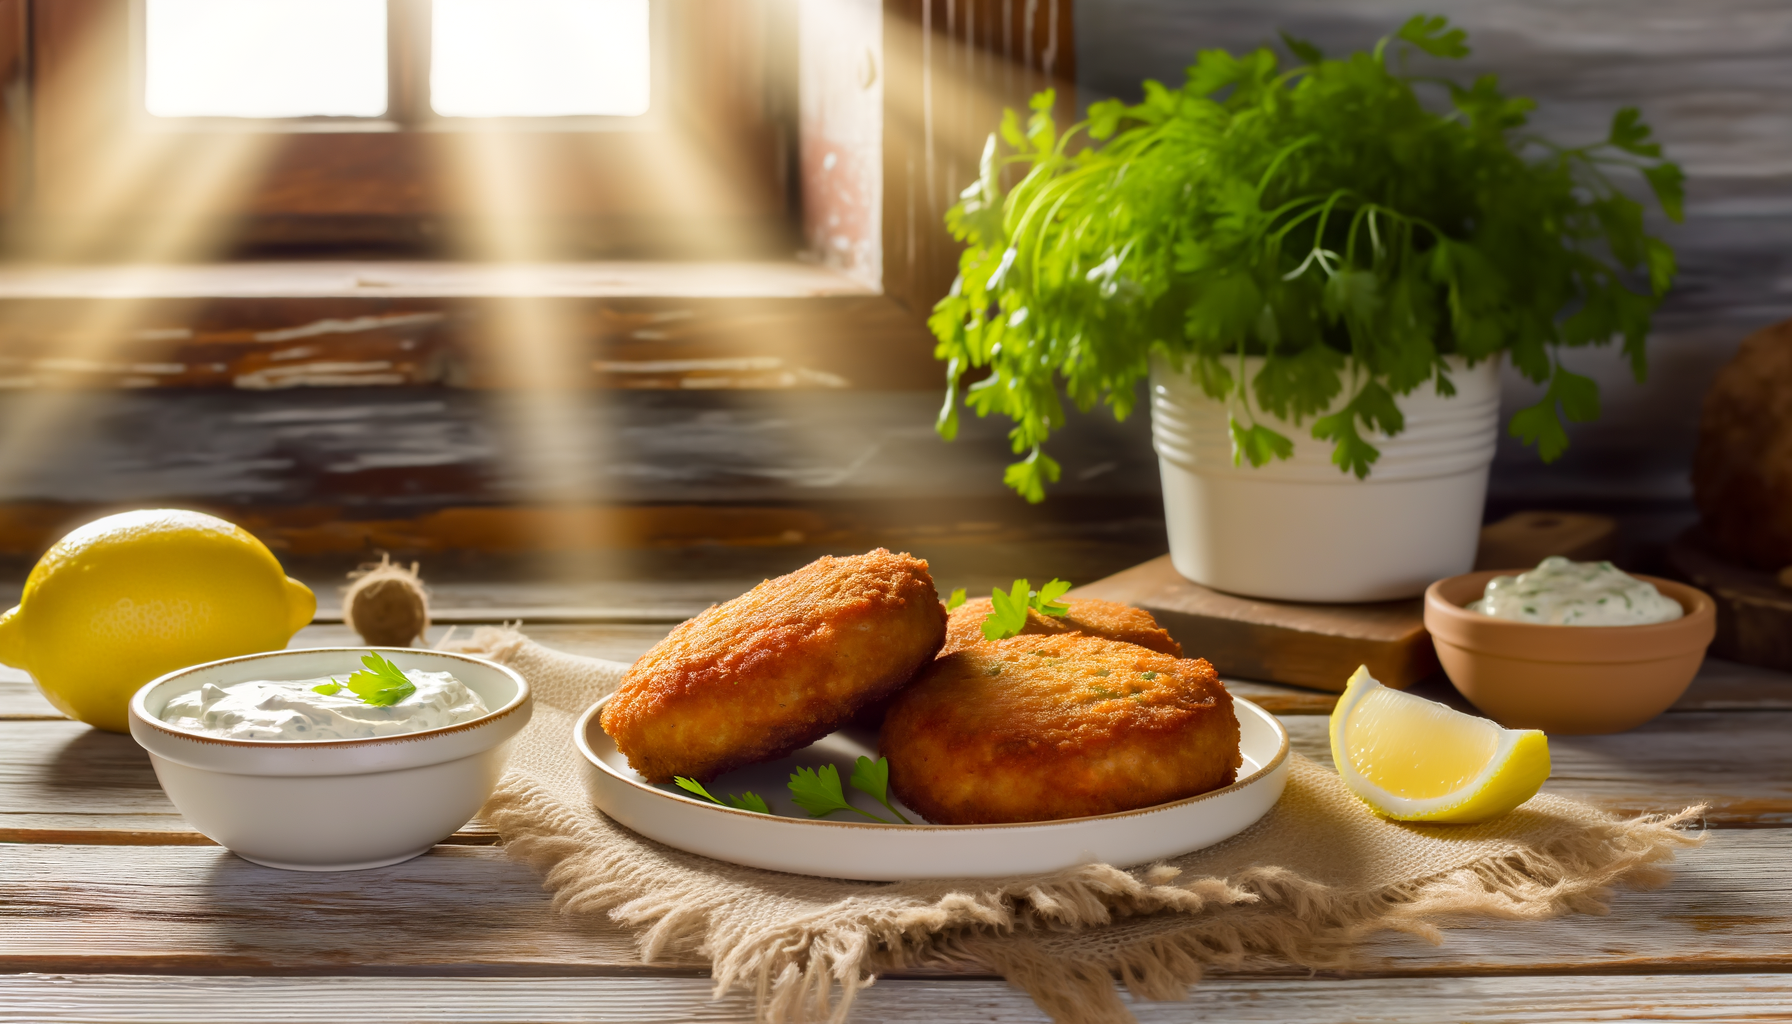 Cozy kitchen table scene with golden-brown southern fried salmon patties, tartar sauce, lemon wedge, and parsley garnish.